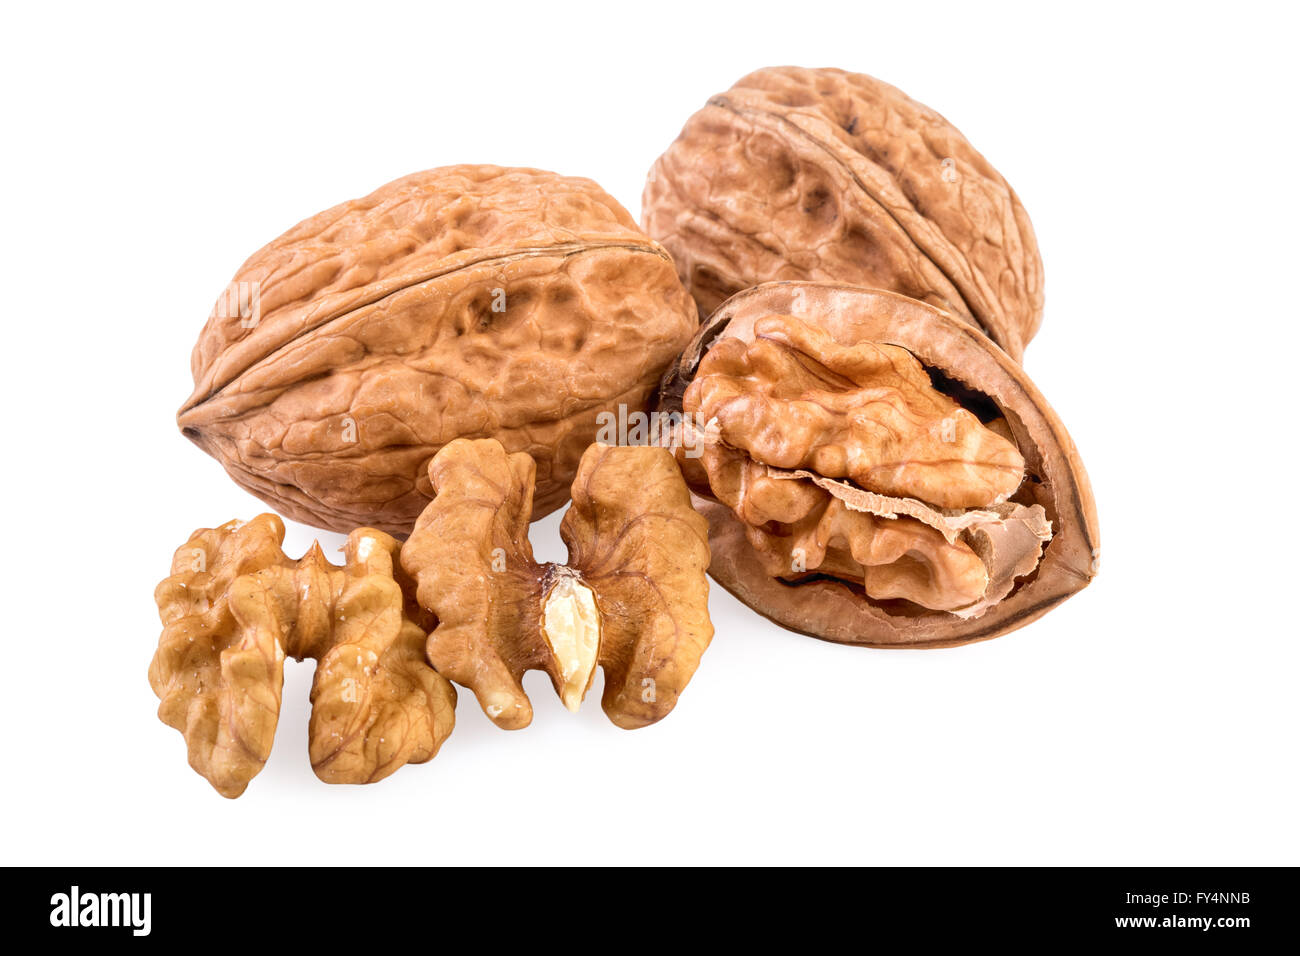 Walnuts whole and shelled. Walnuts isolated on white background. Stock Photo